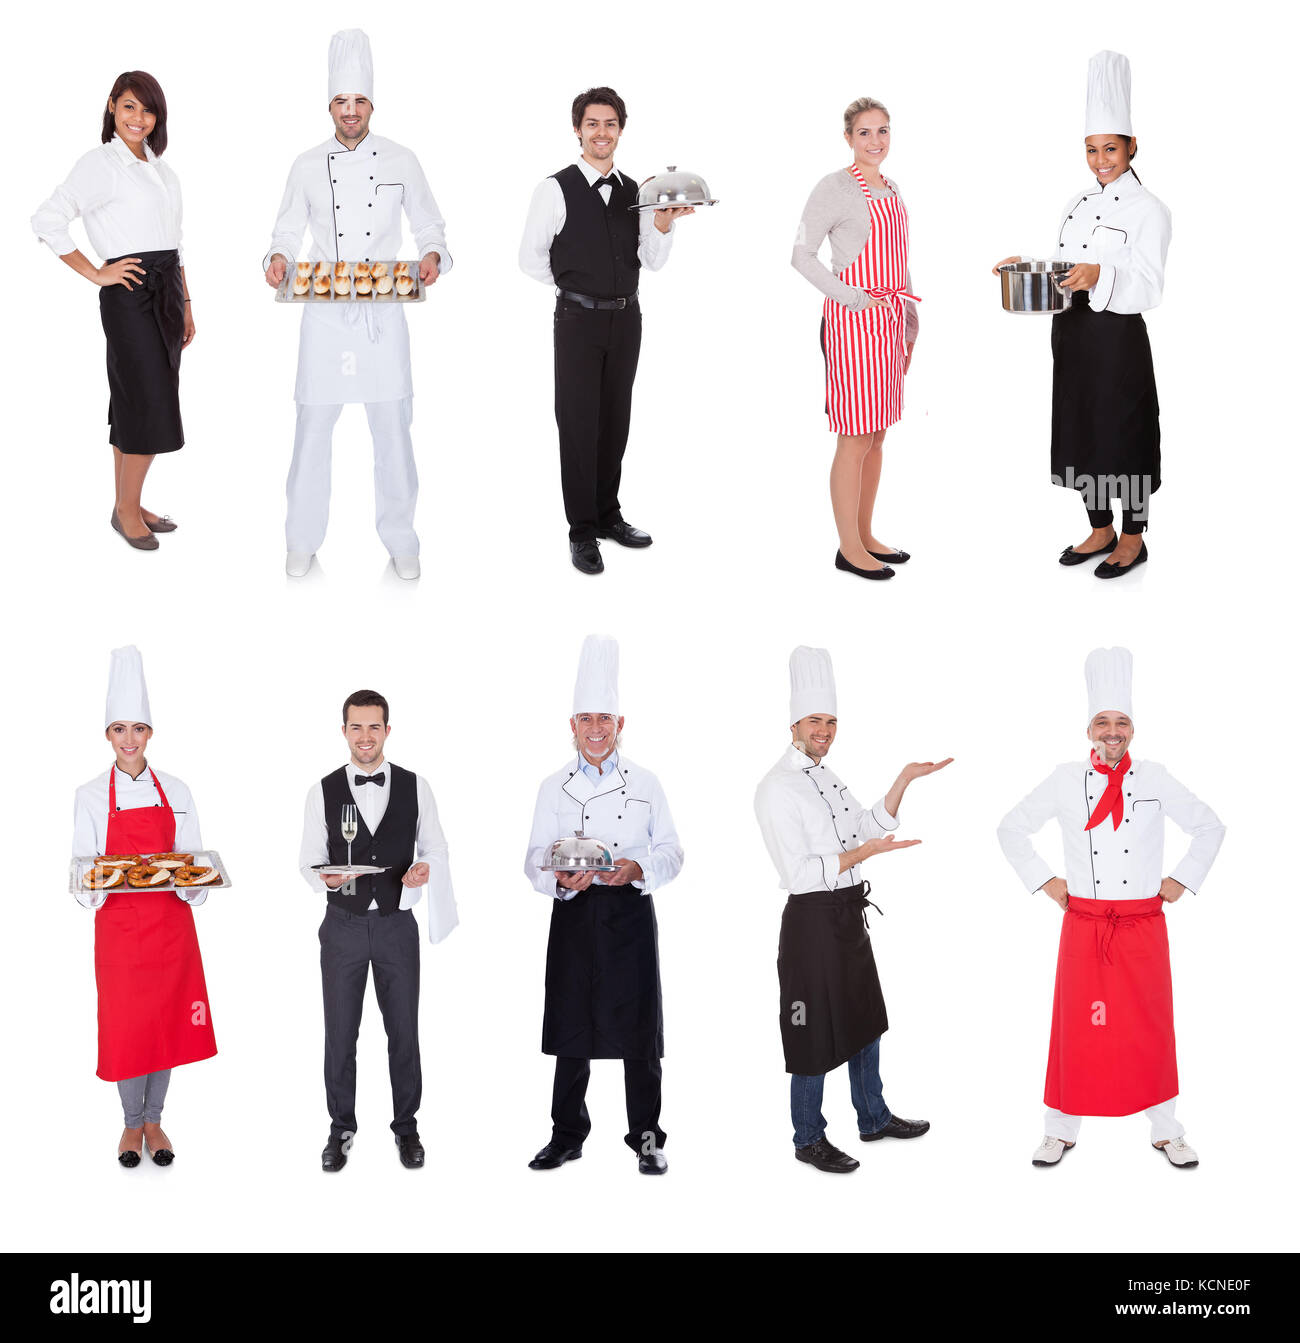 Restaurant workers, cooks, bullets and waiters. Isolated on white Stock Photo